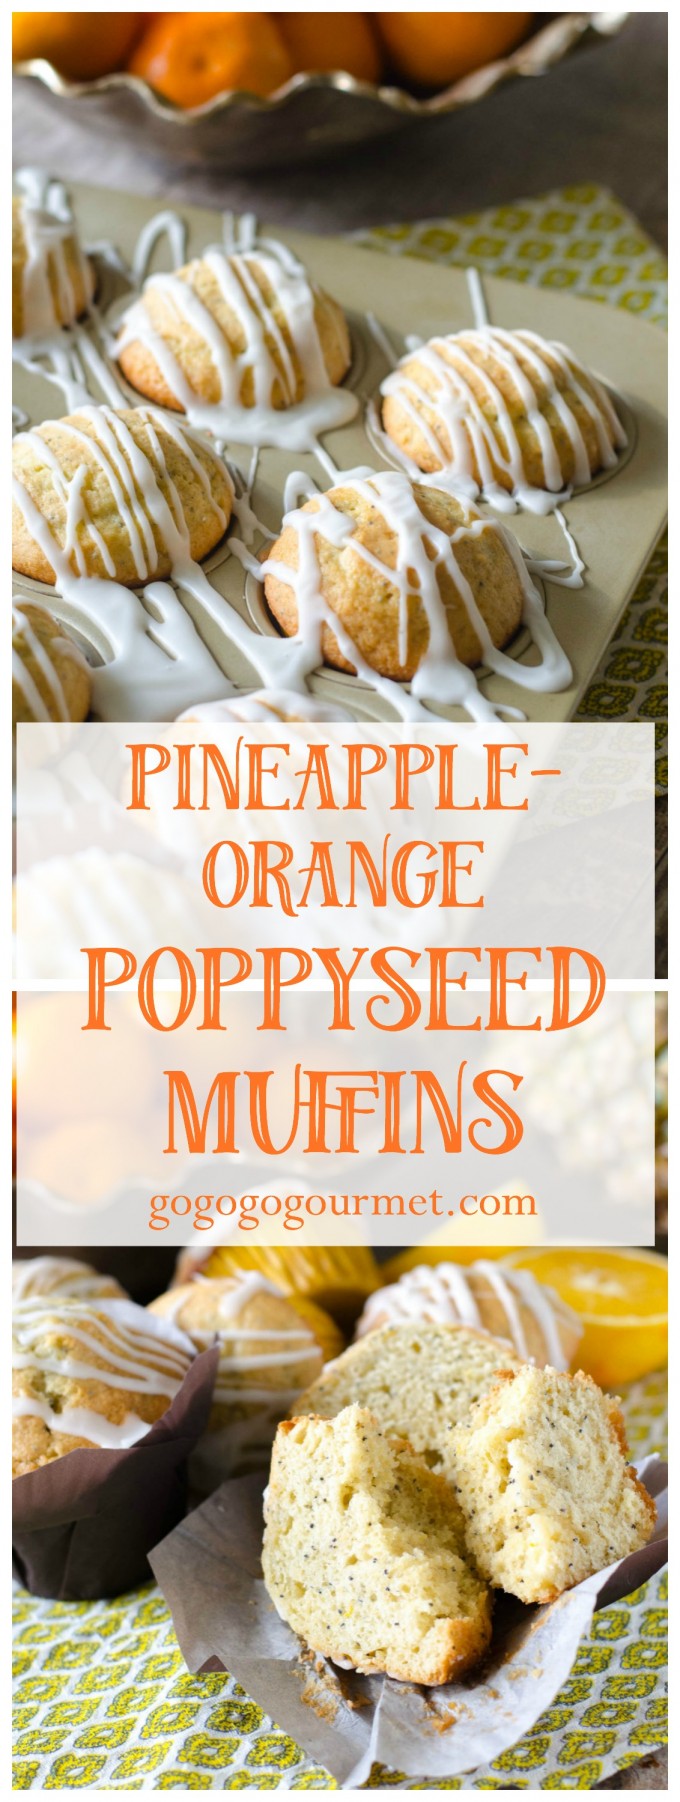 These citrusy-sweet muffins are a great start to the day! Pineapple Orange Poppyseed Muffins | Go Go Go Gourmet @Go Go Go Gourmet via @gogogogourmet